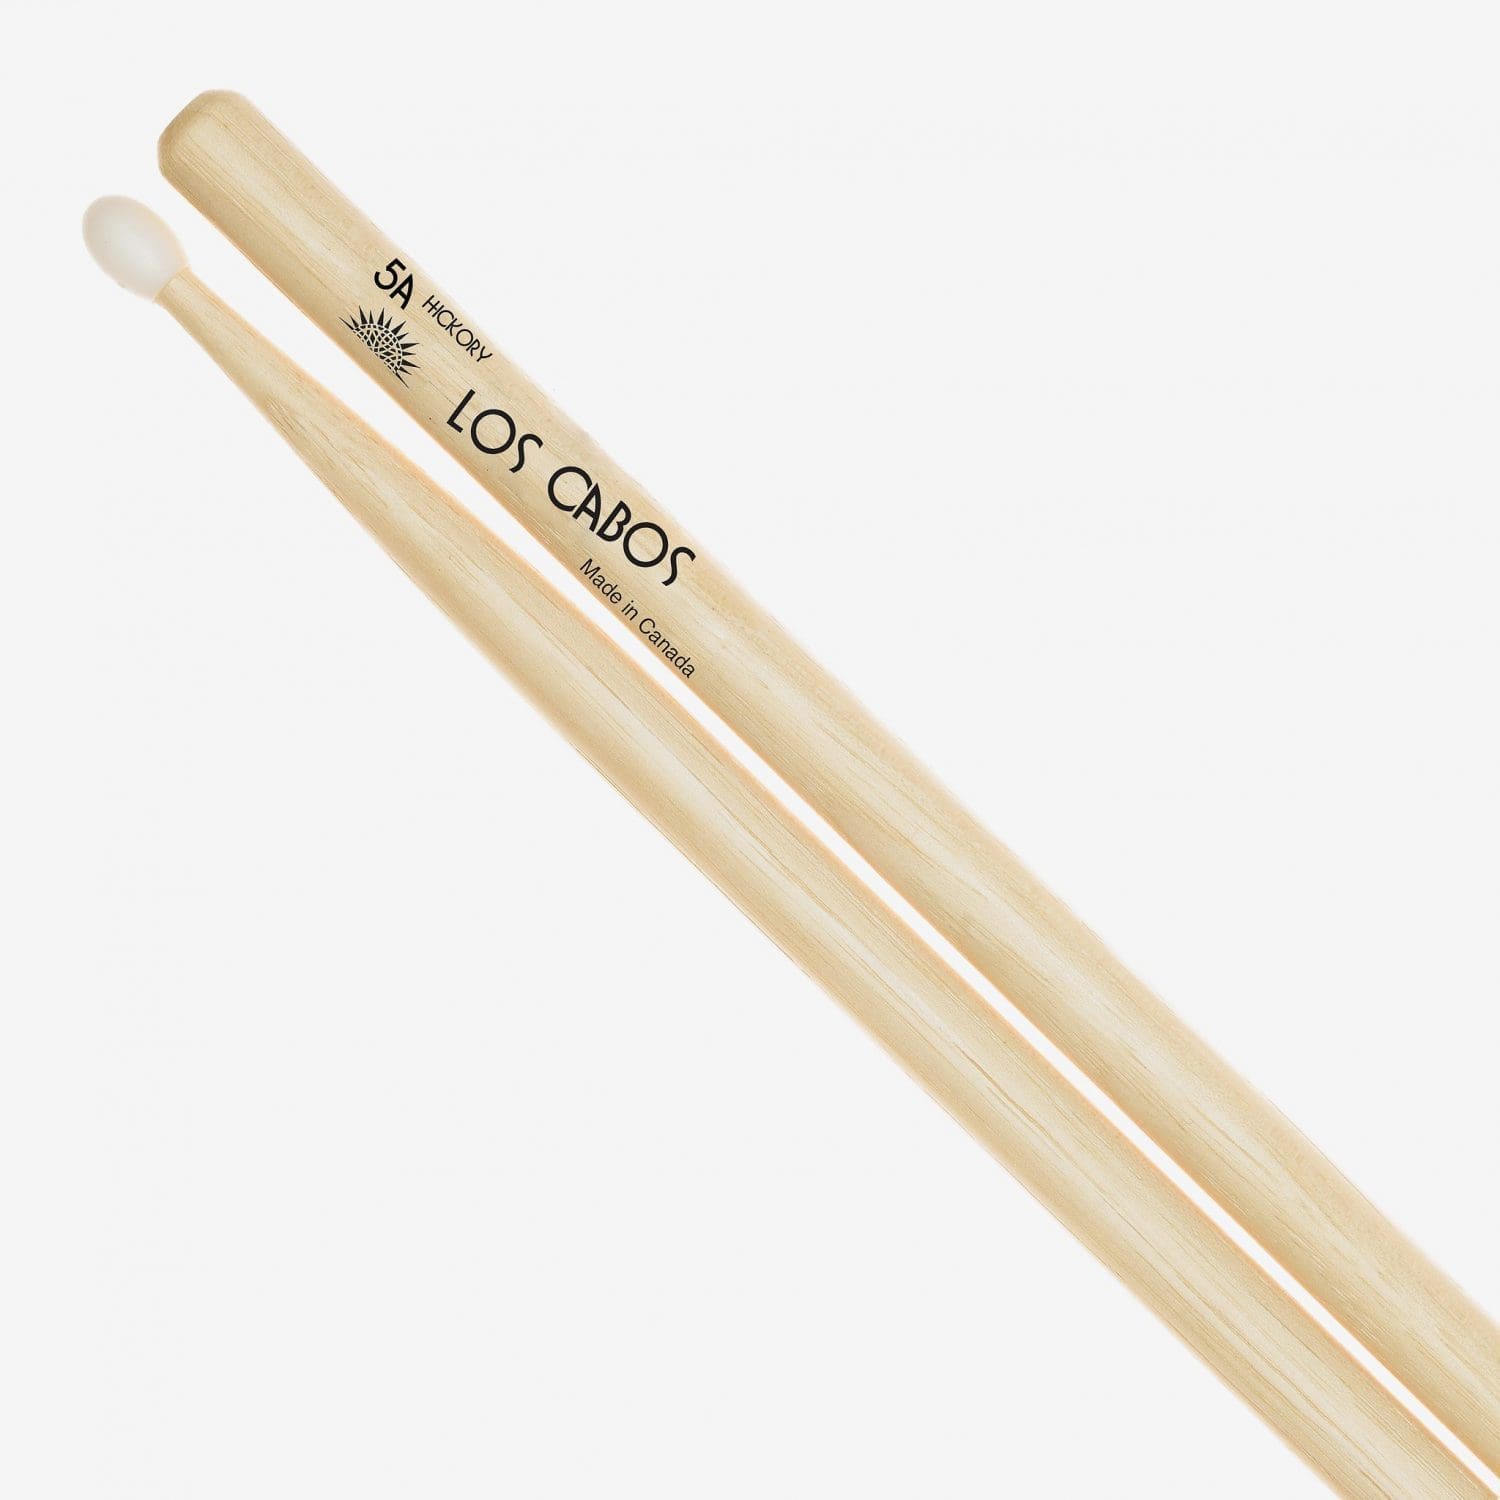 Los Cabos Hickory Nylon Tipped Drumsticks